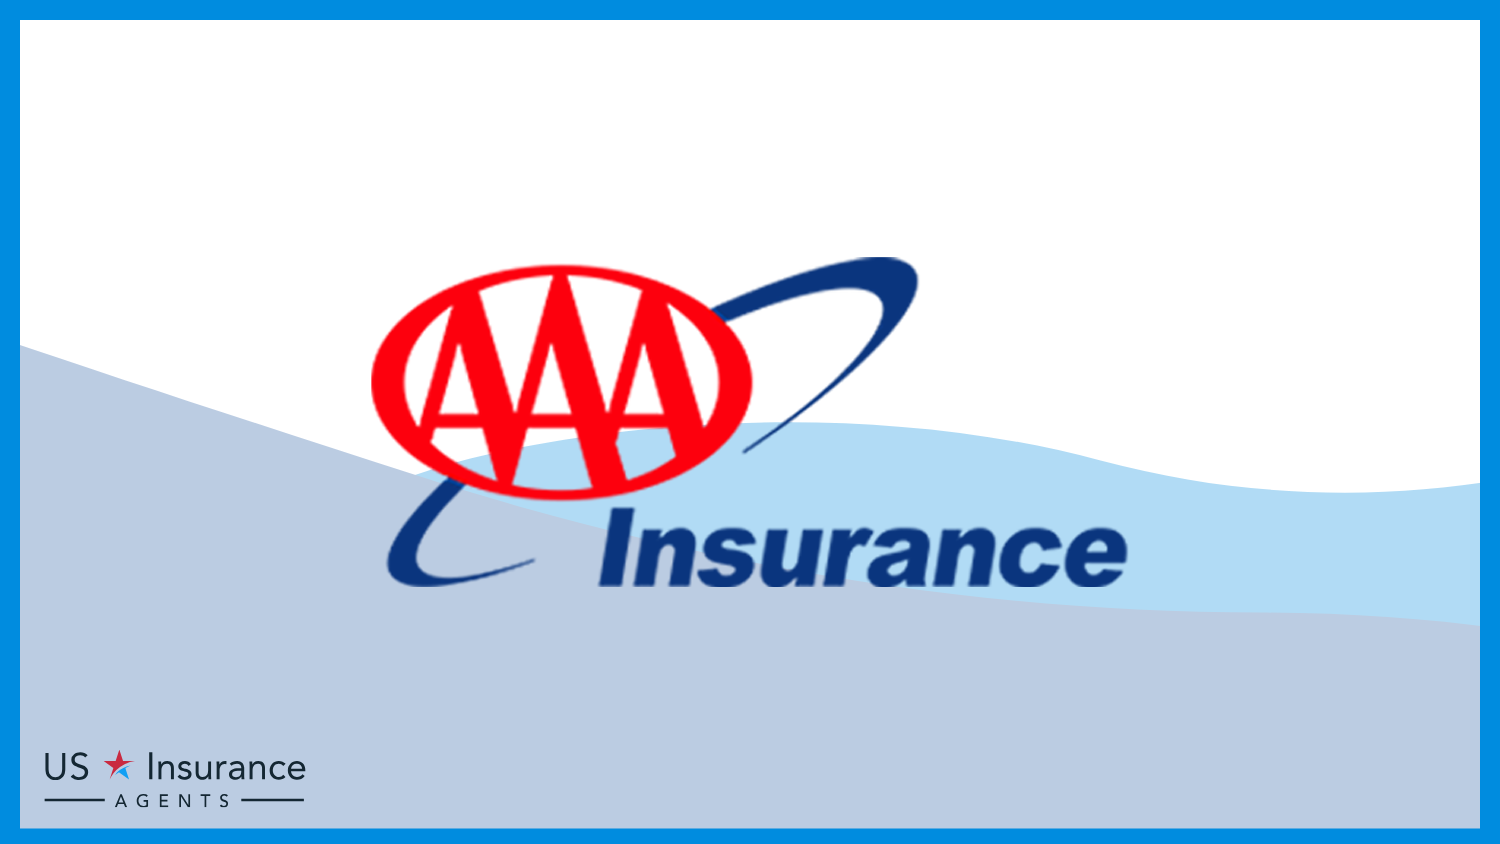 AAA: Best Auto Insurance for Students